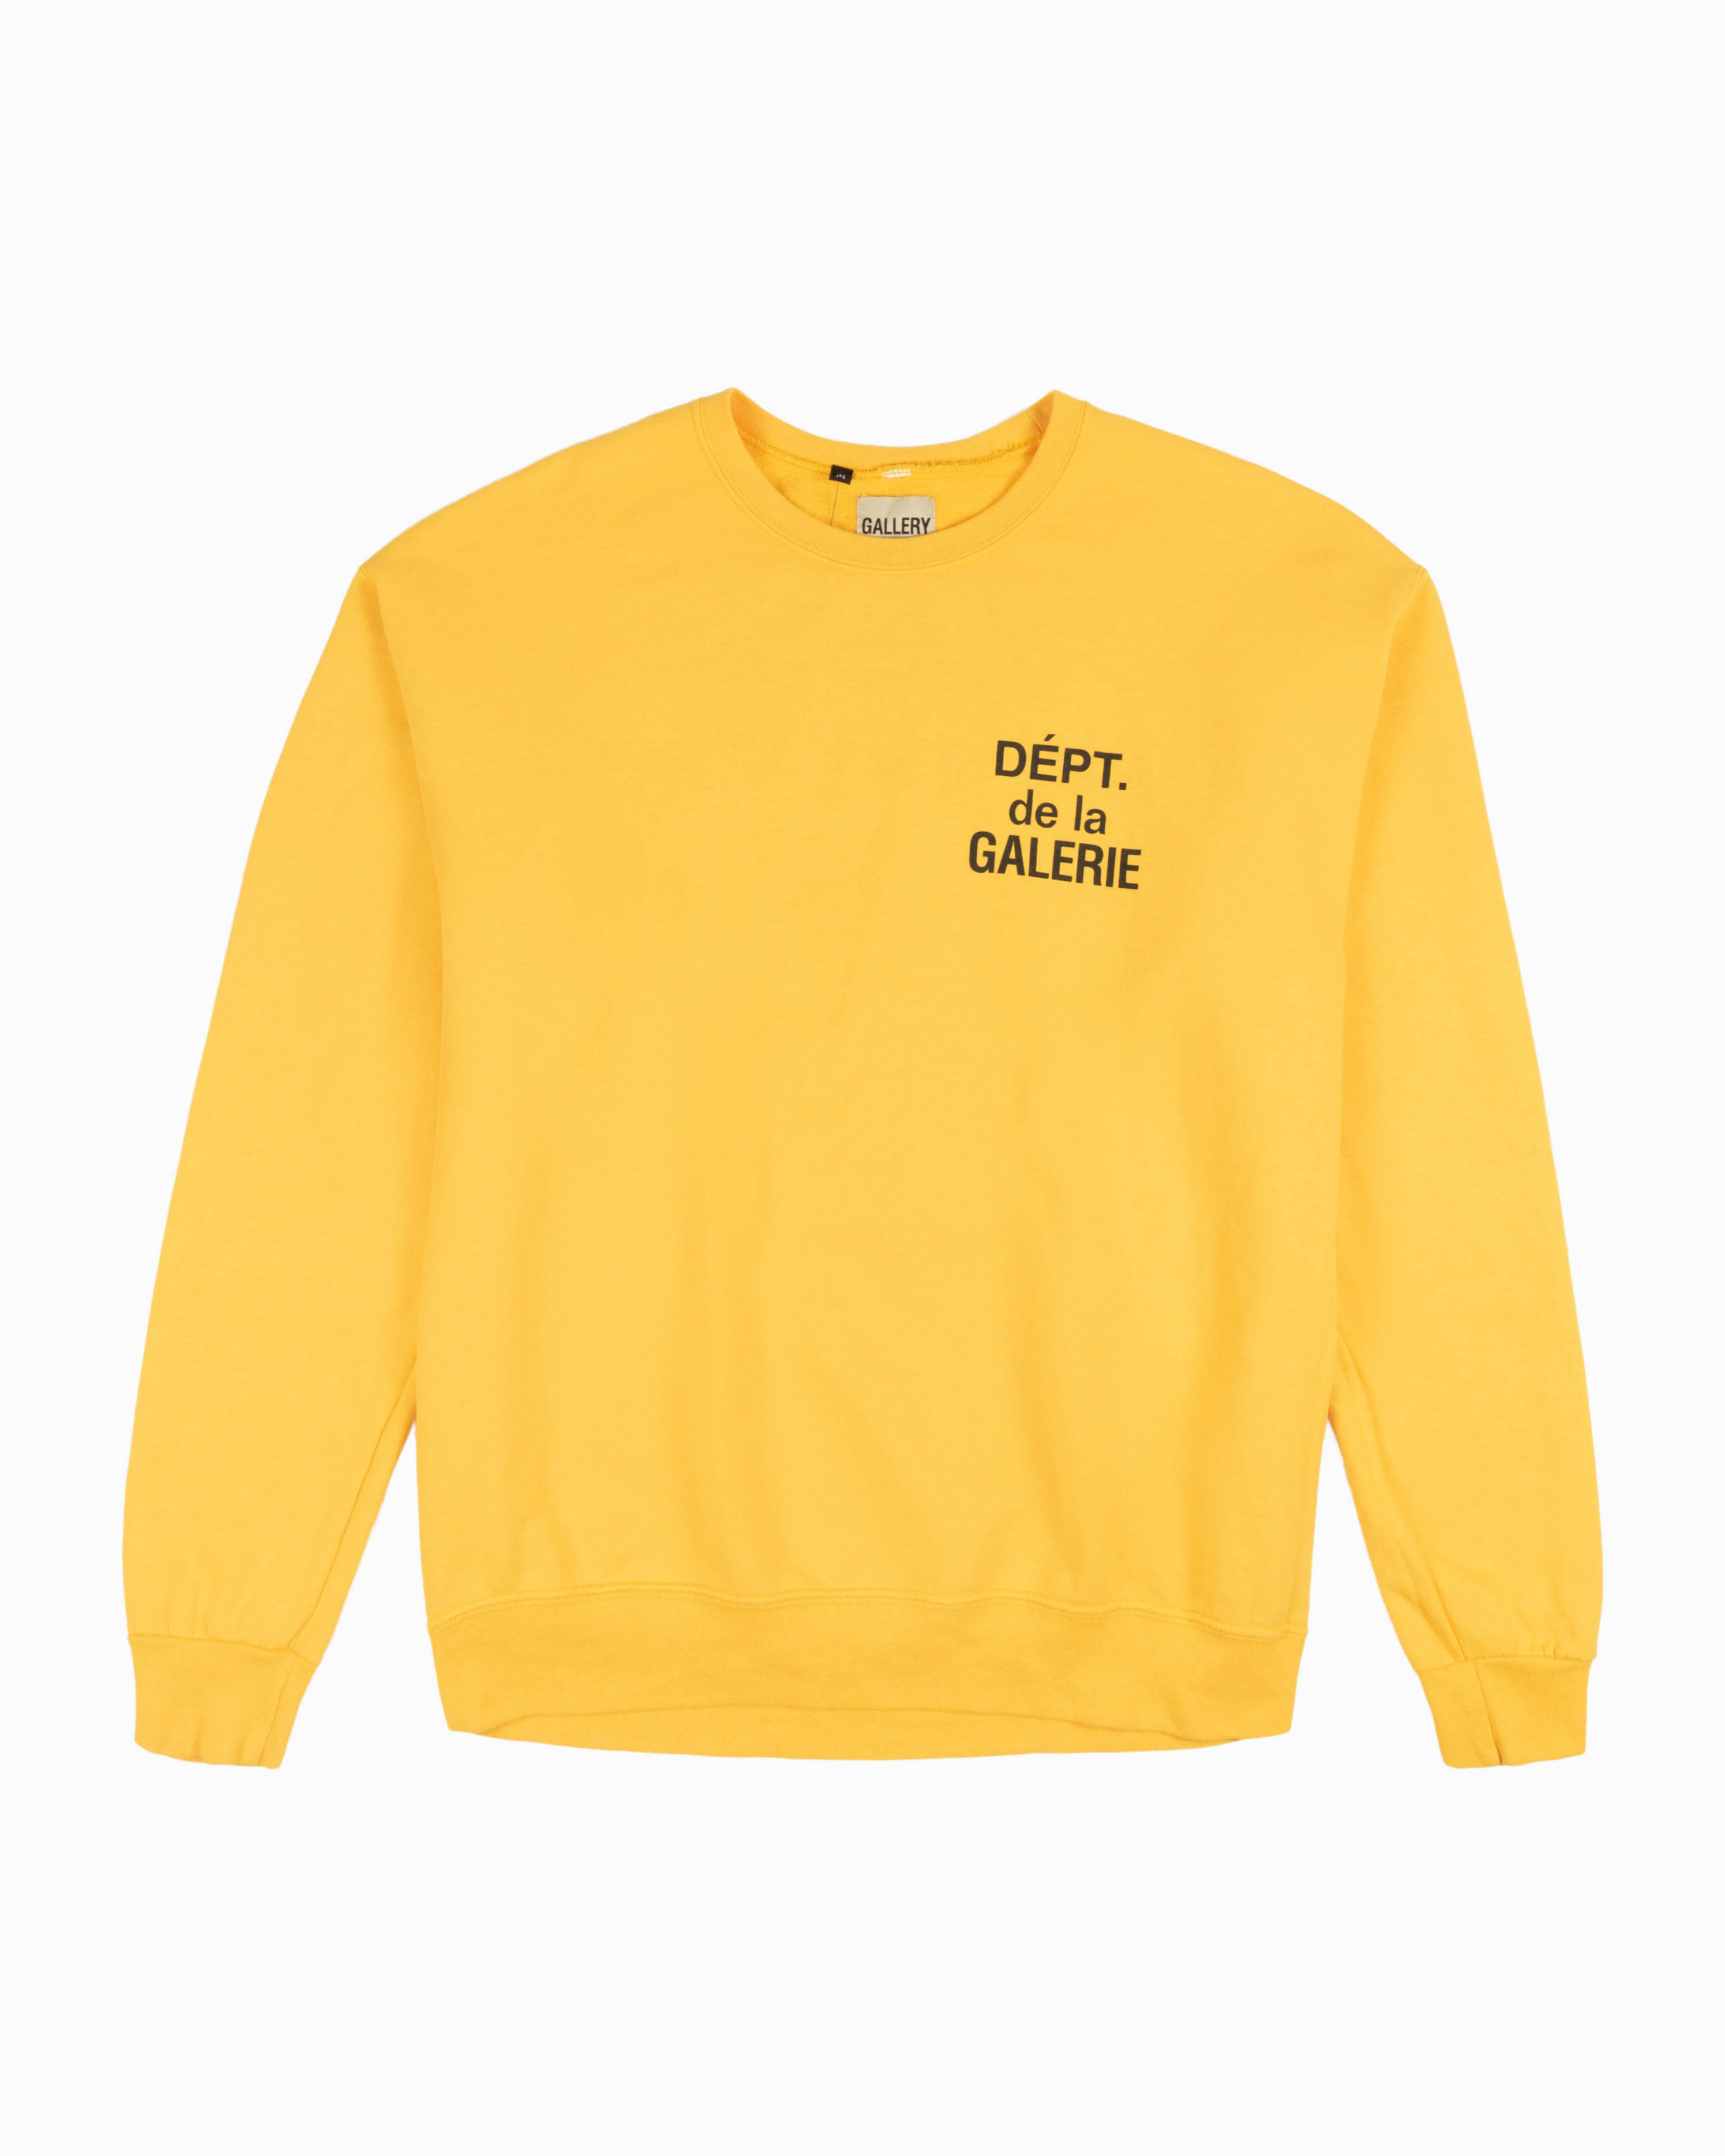 French ATK Reversible Sweater GALLERY DEPT. Tops Sweats & Hoodies Yellow